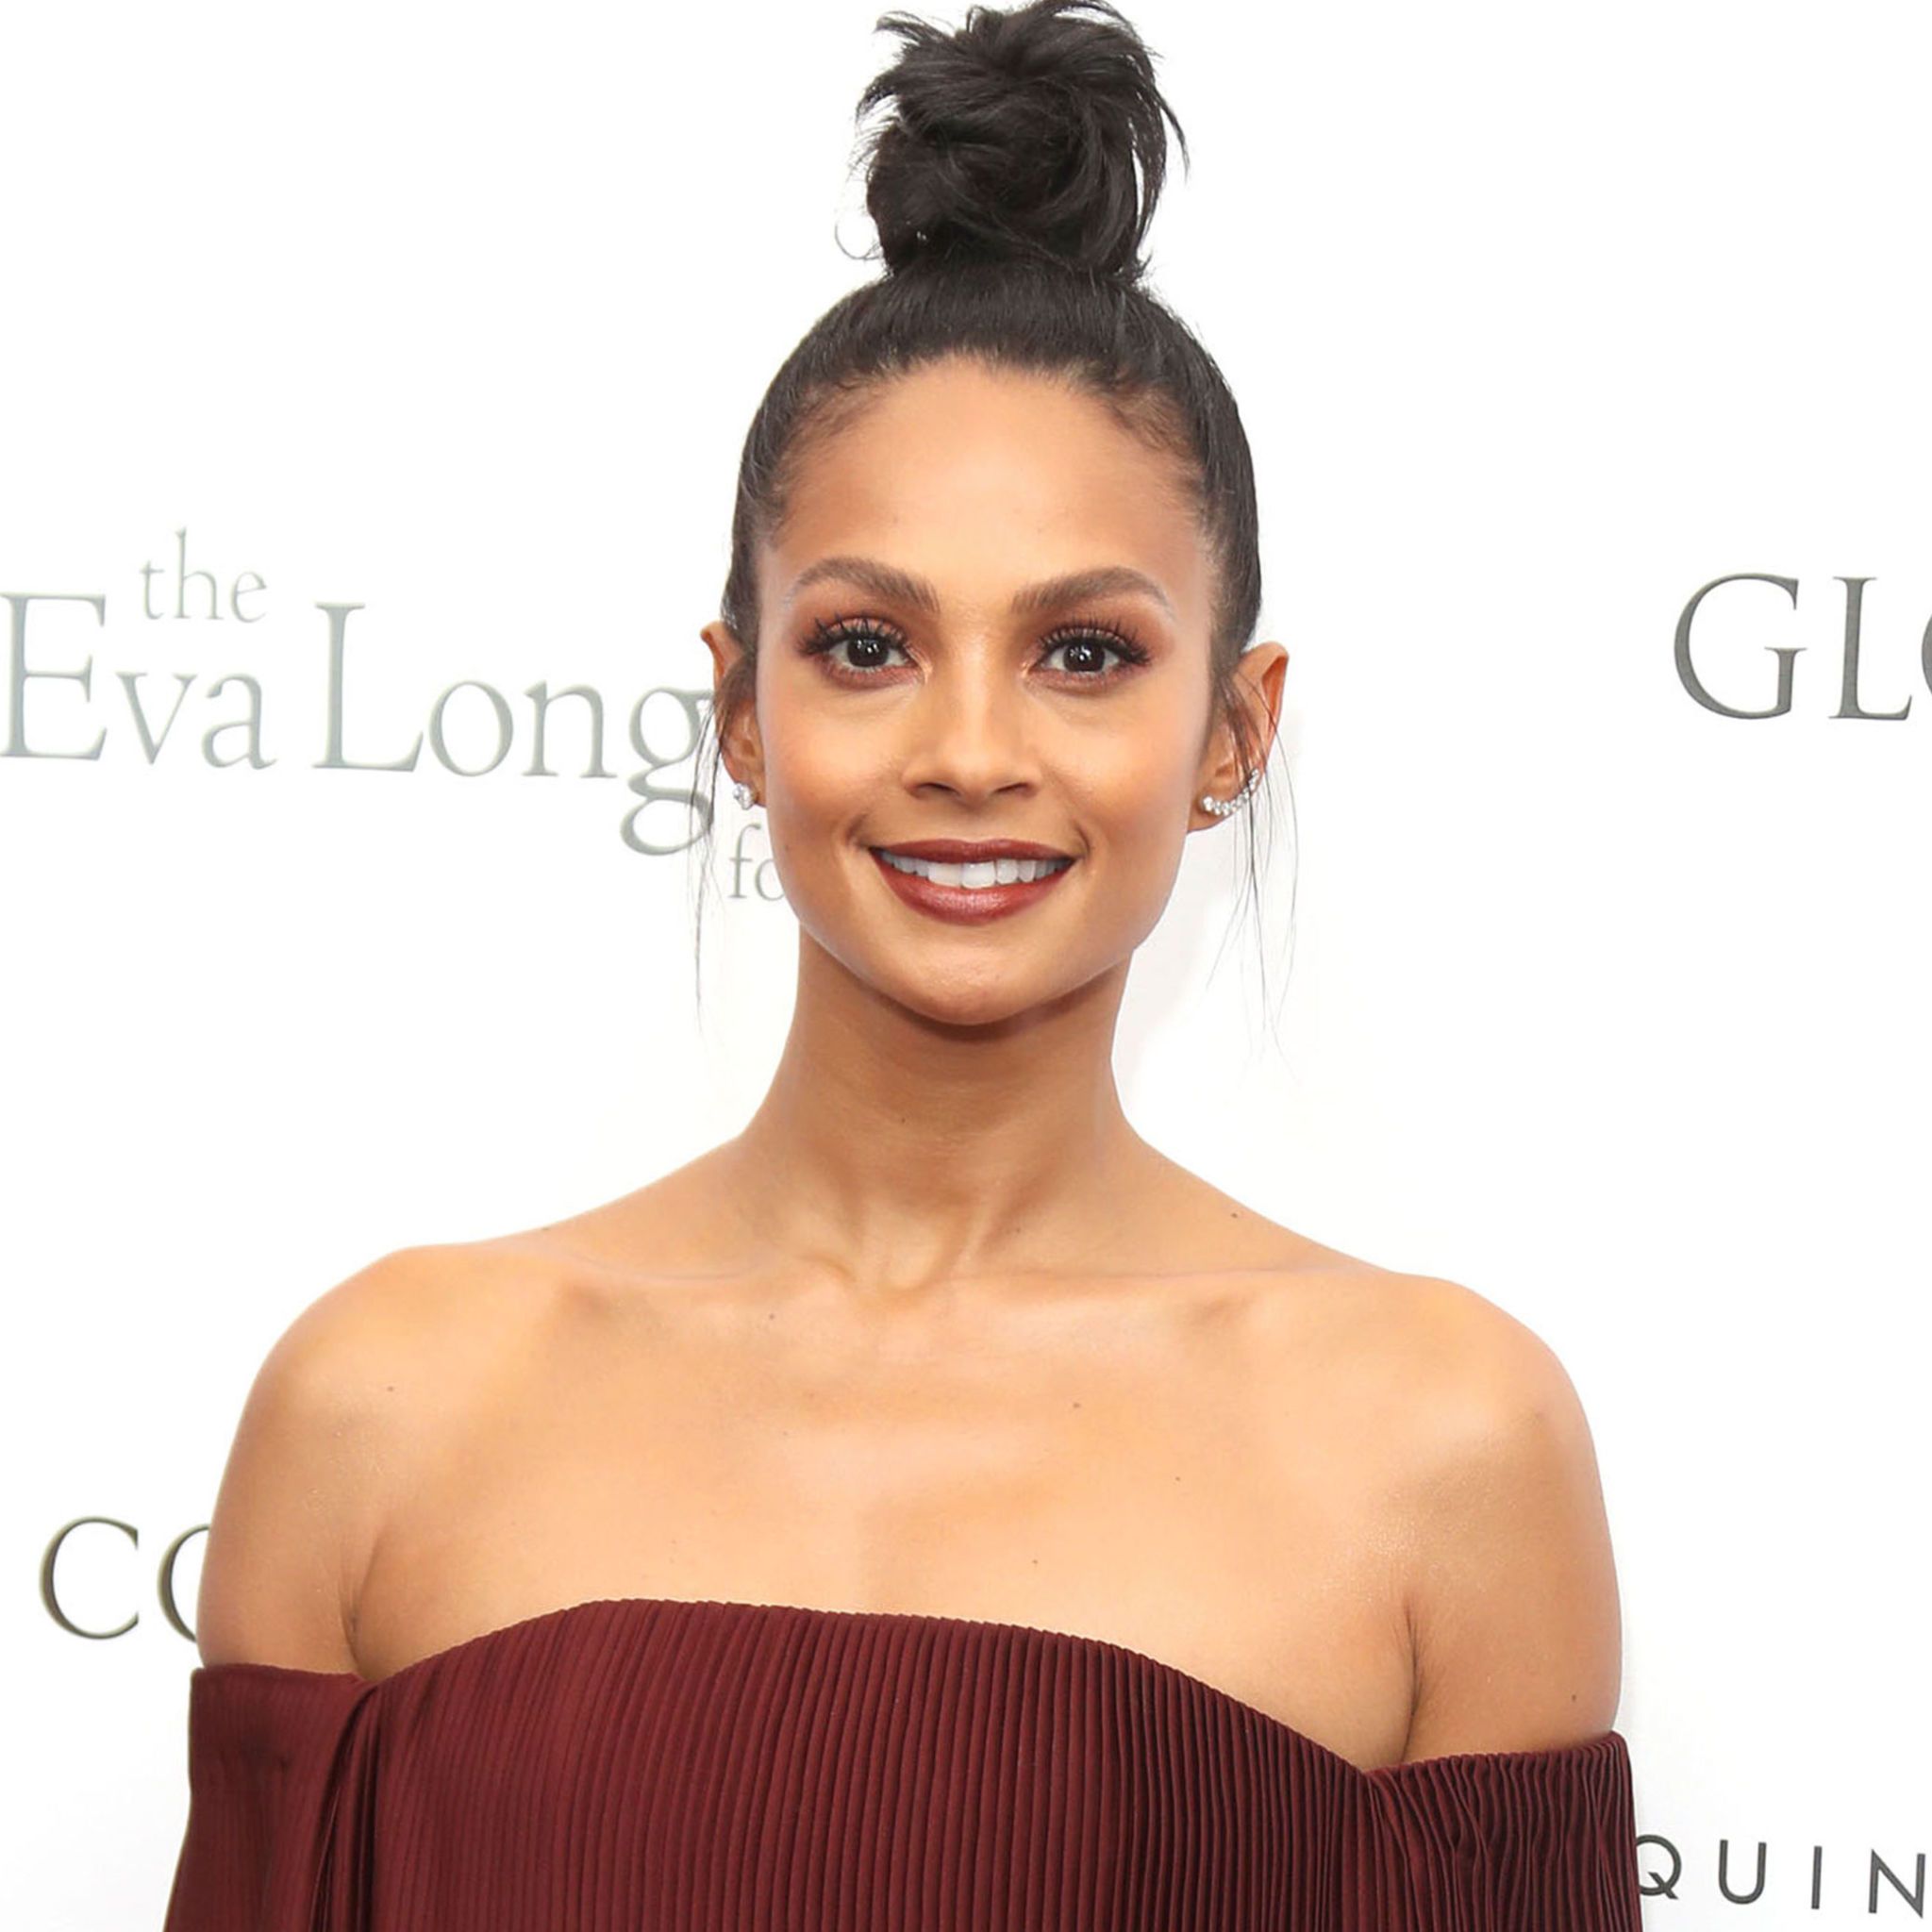 Alesha Dixon delights fans with rare photo of baby daughter